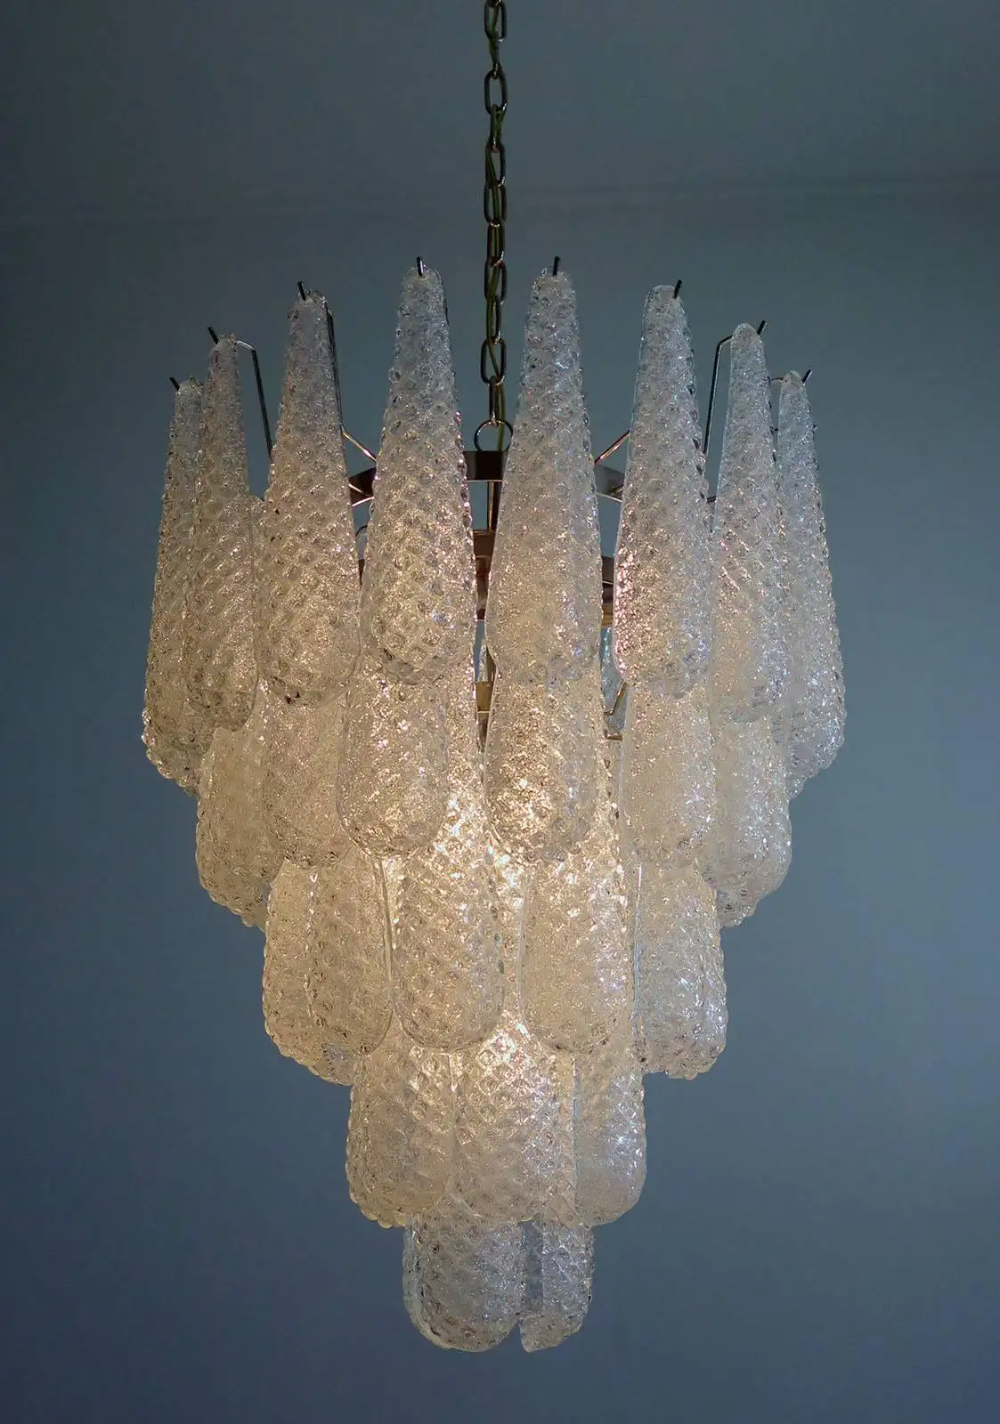 The Timeless Elegance of a Glass Chandelier